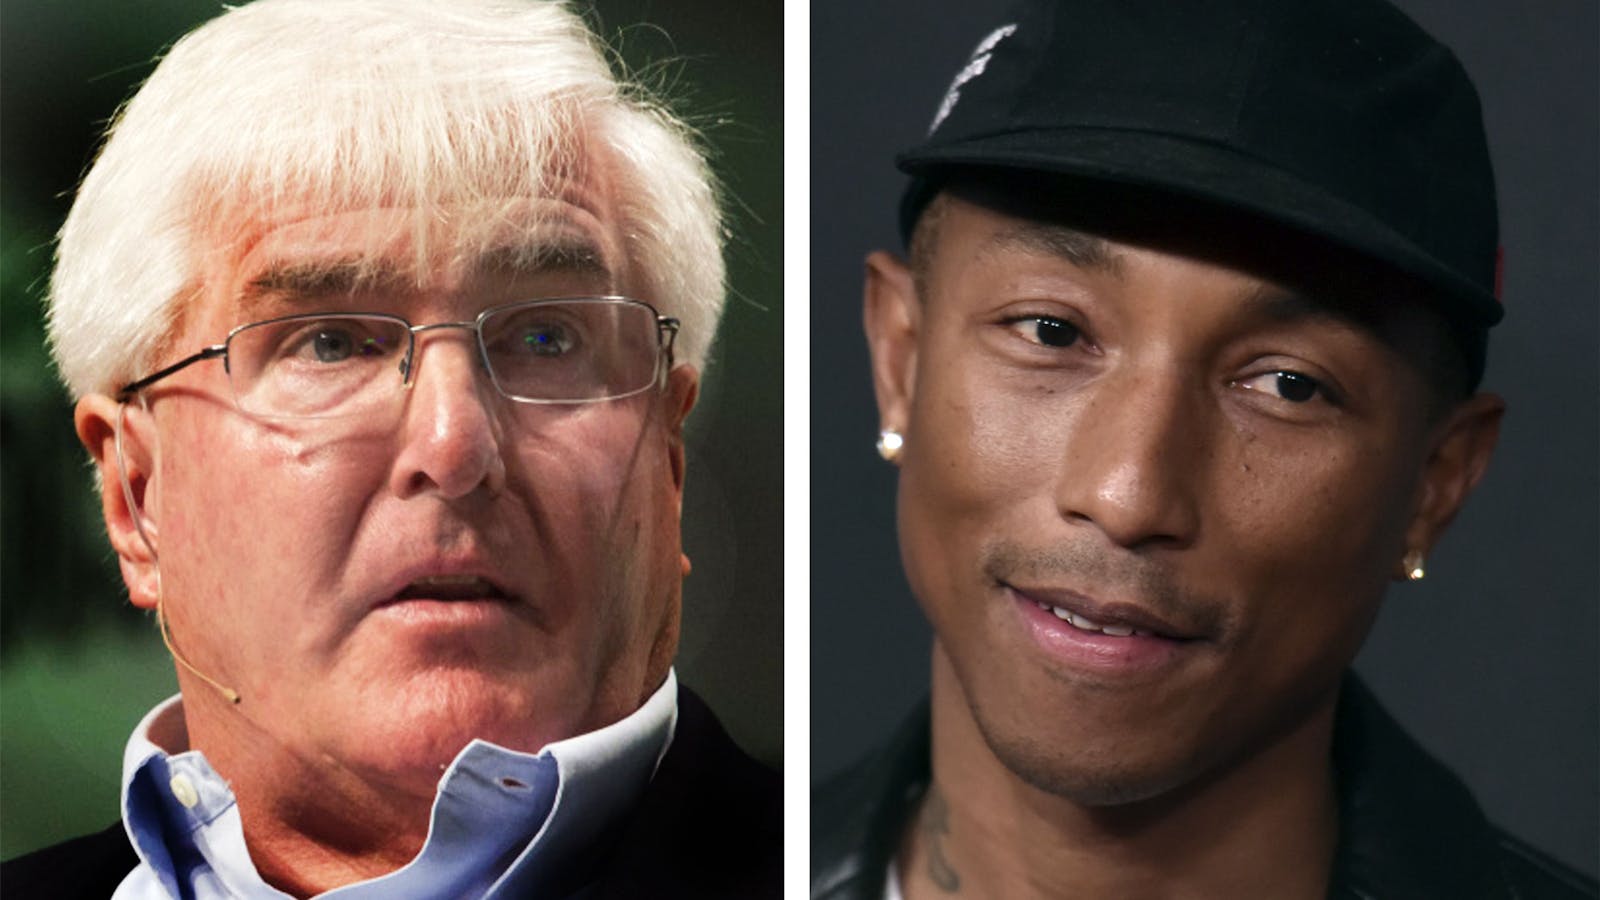 Ron Conway (left) and Pharrell Williams. Photos by Bloomberg; AP